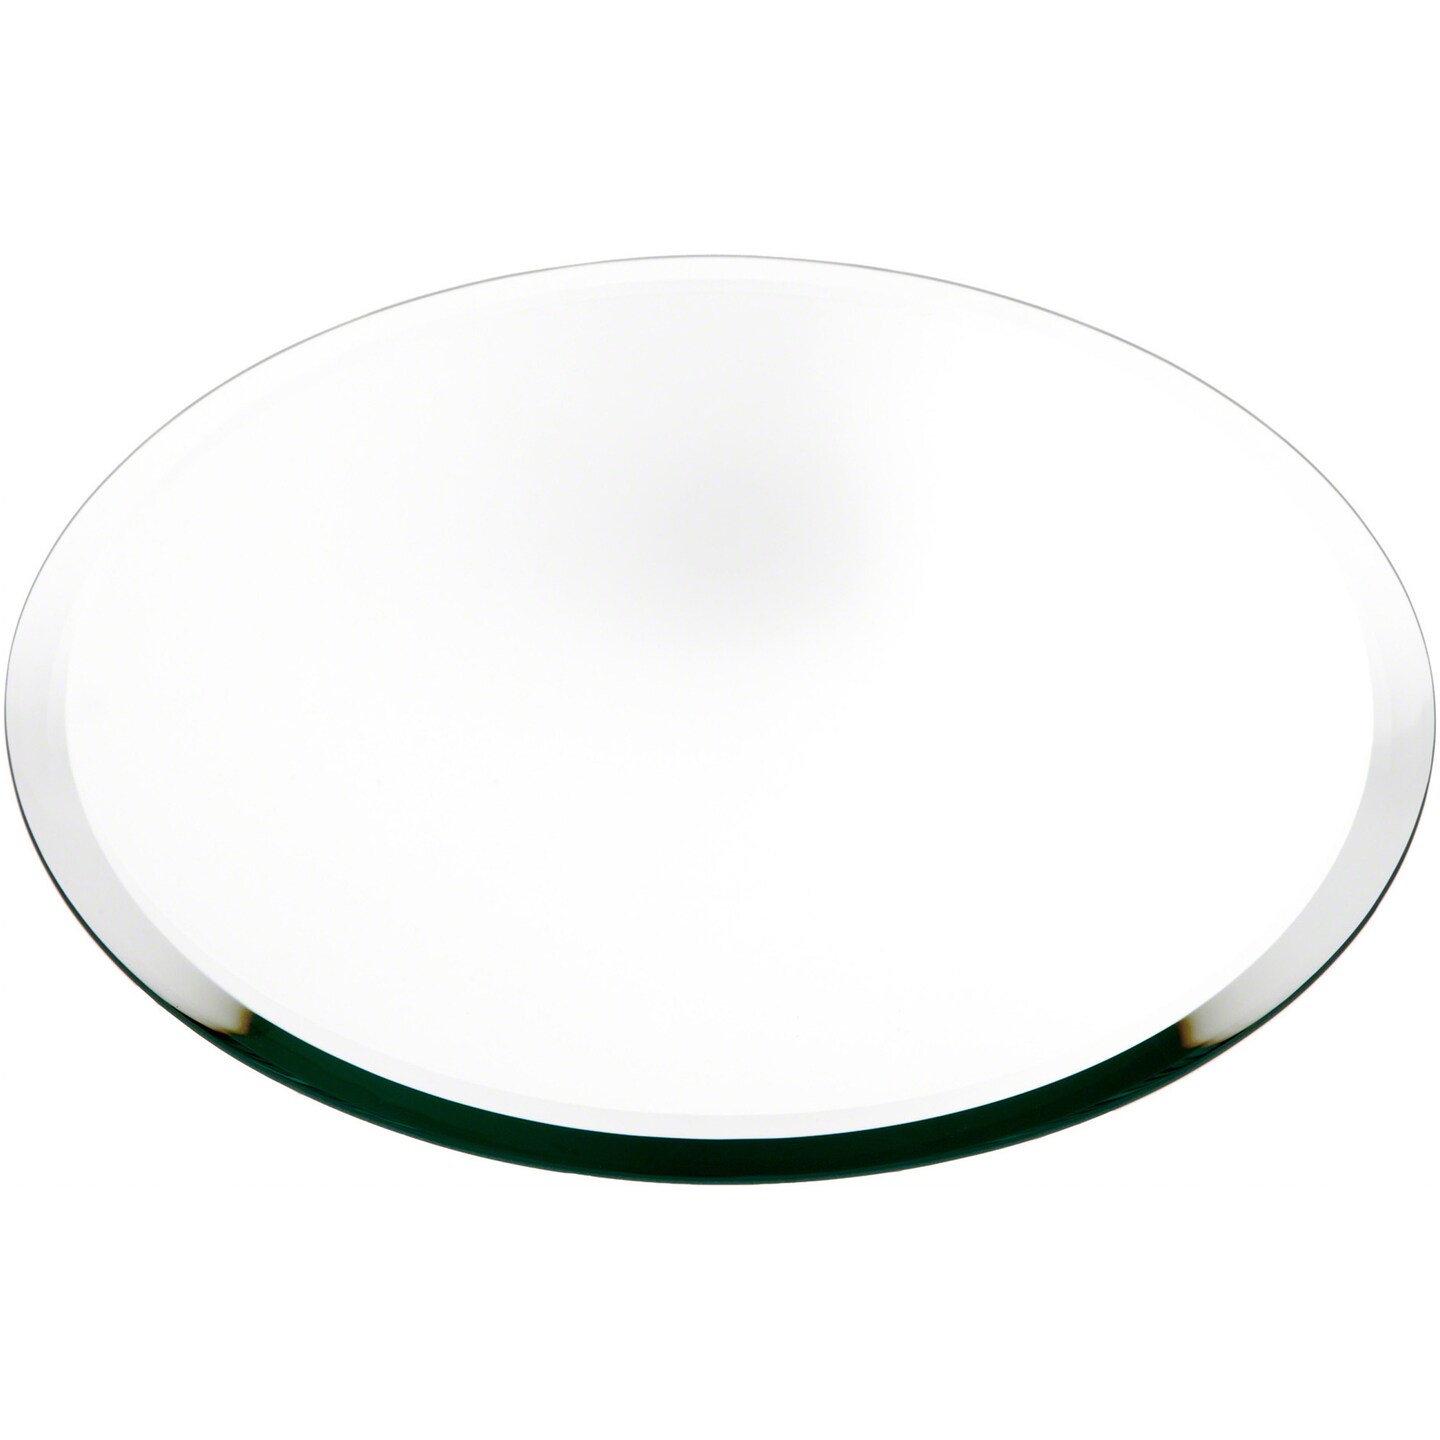 JAMBALAY 12 Round Mirror Trays, Set of 12 2mm Circle Mirror Candle Plates for